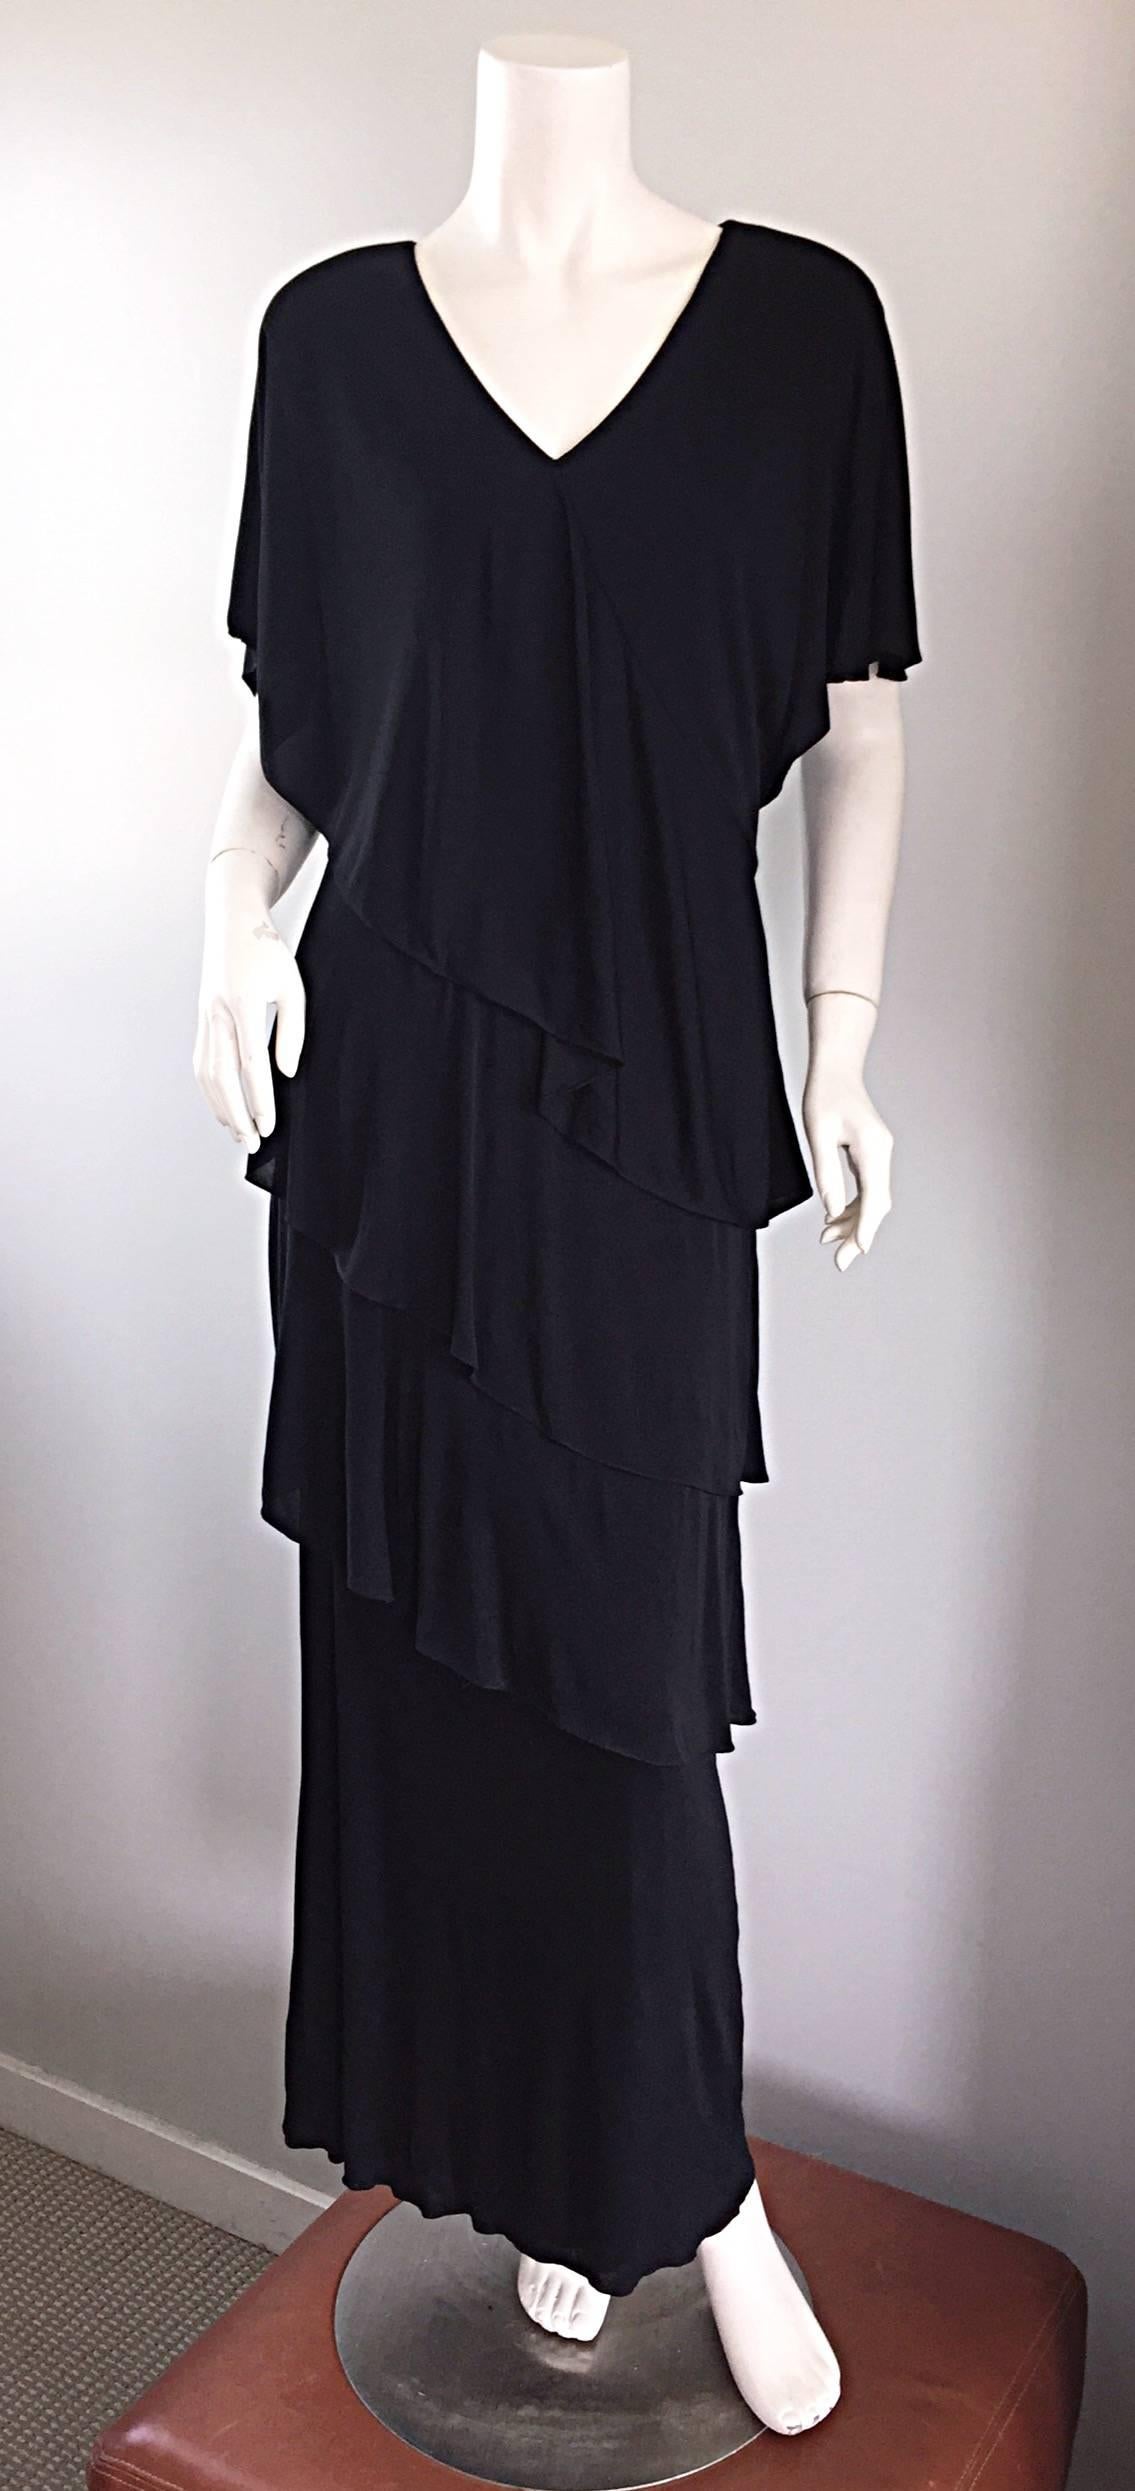 Vintage Holly's Harp Black Silk Jersey Signature Tiered Layered Boho Dress Gown 1